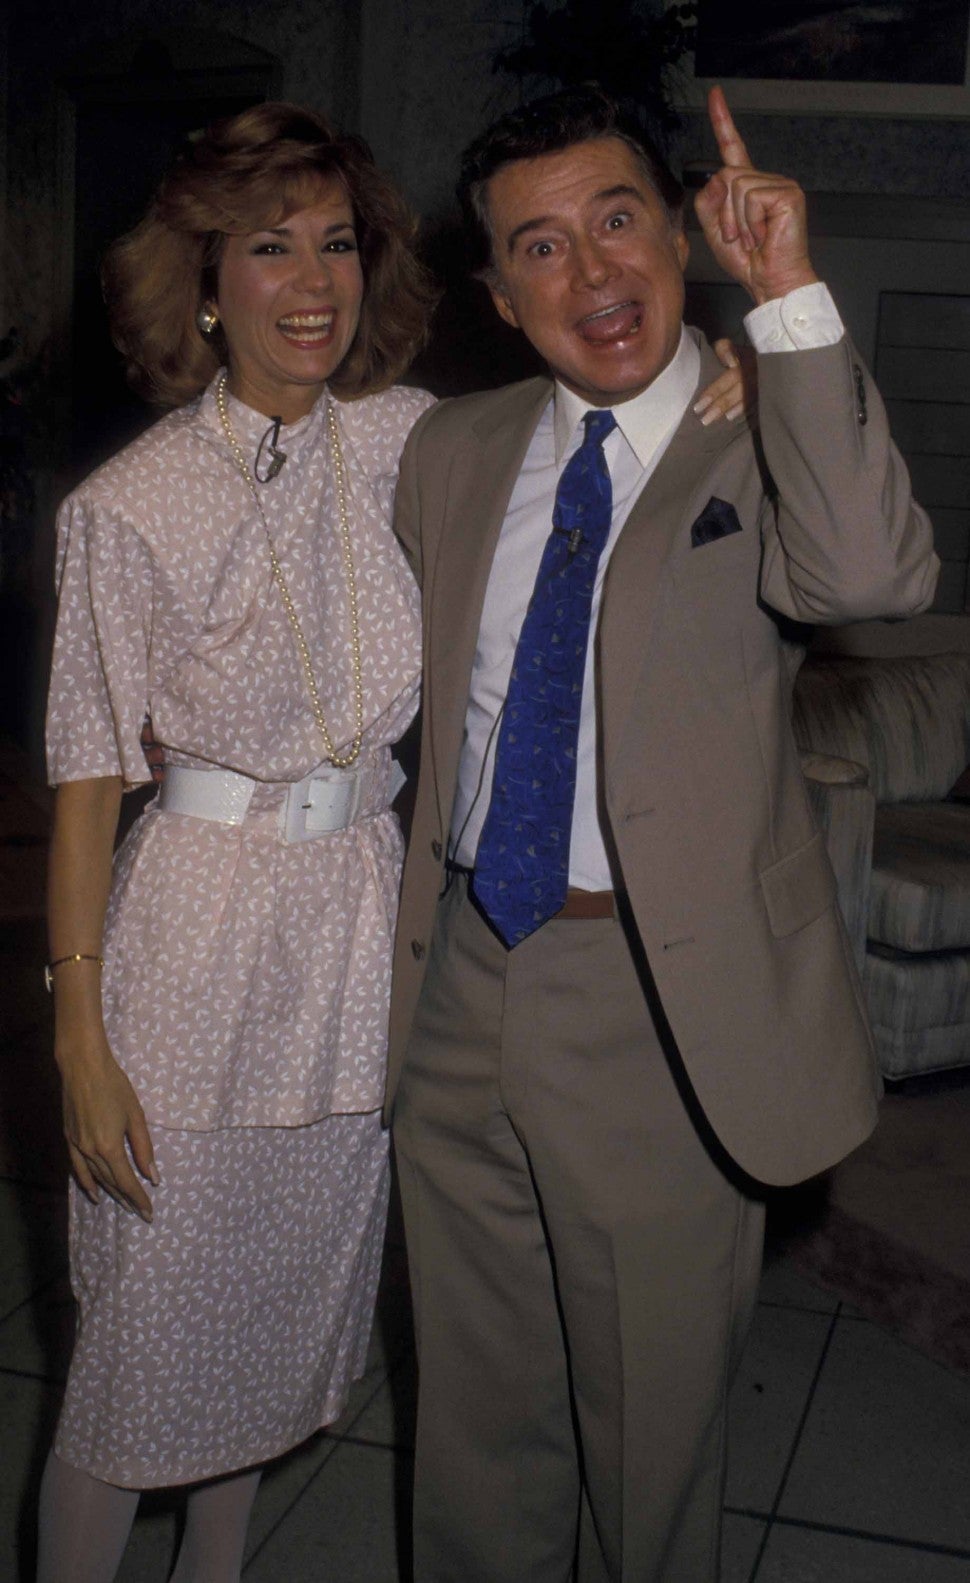 Kathy Lee Gifford and Regis Philbin attend the taping of "Good Morning America" on April 26, 1988 at NBC TV Studios in New York City.